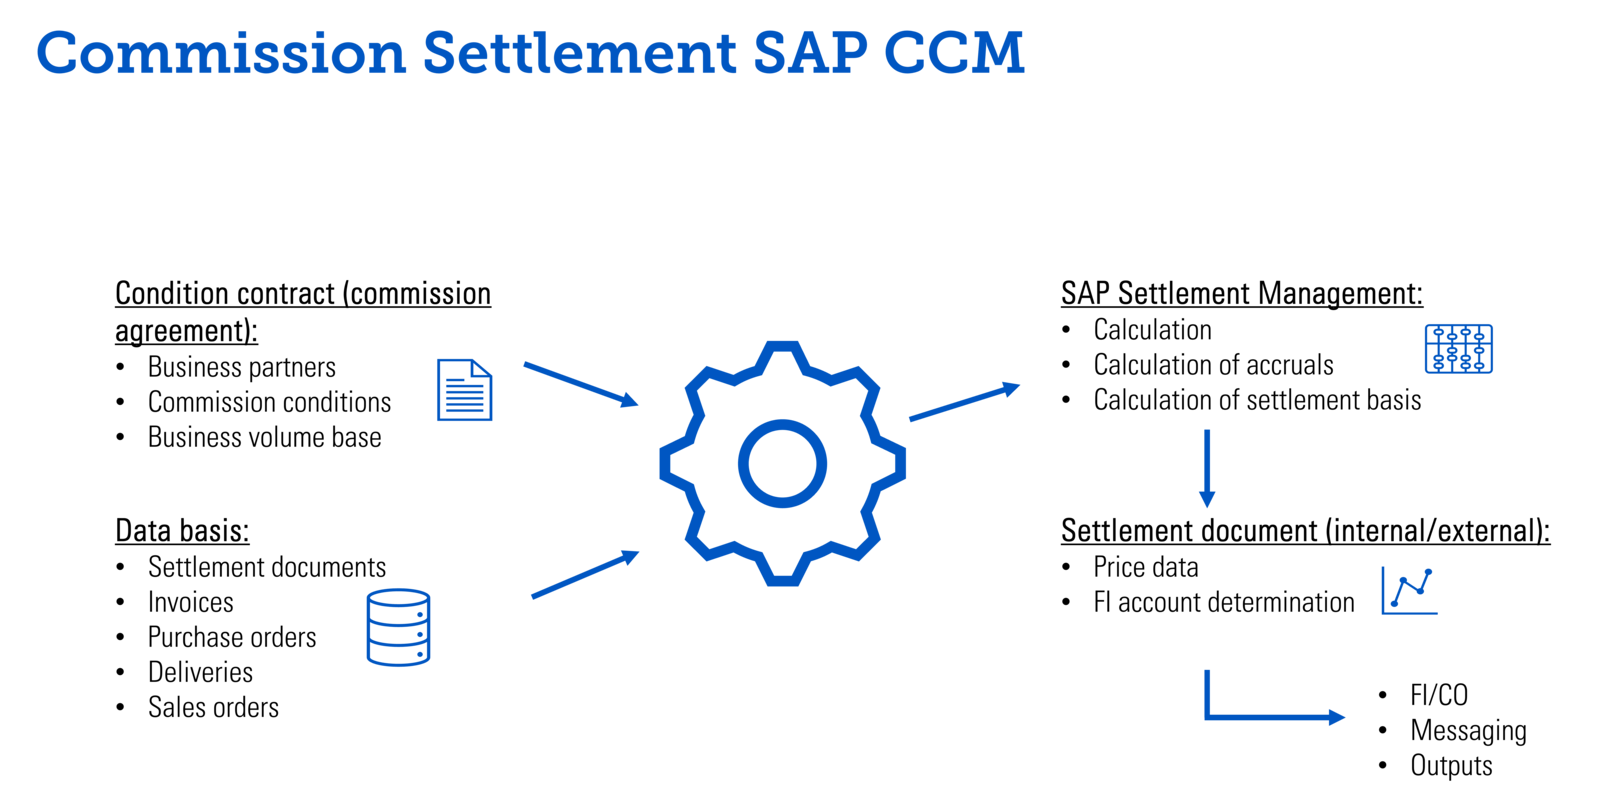 Commission Processing in S/4HANA